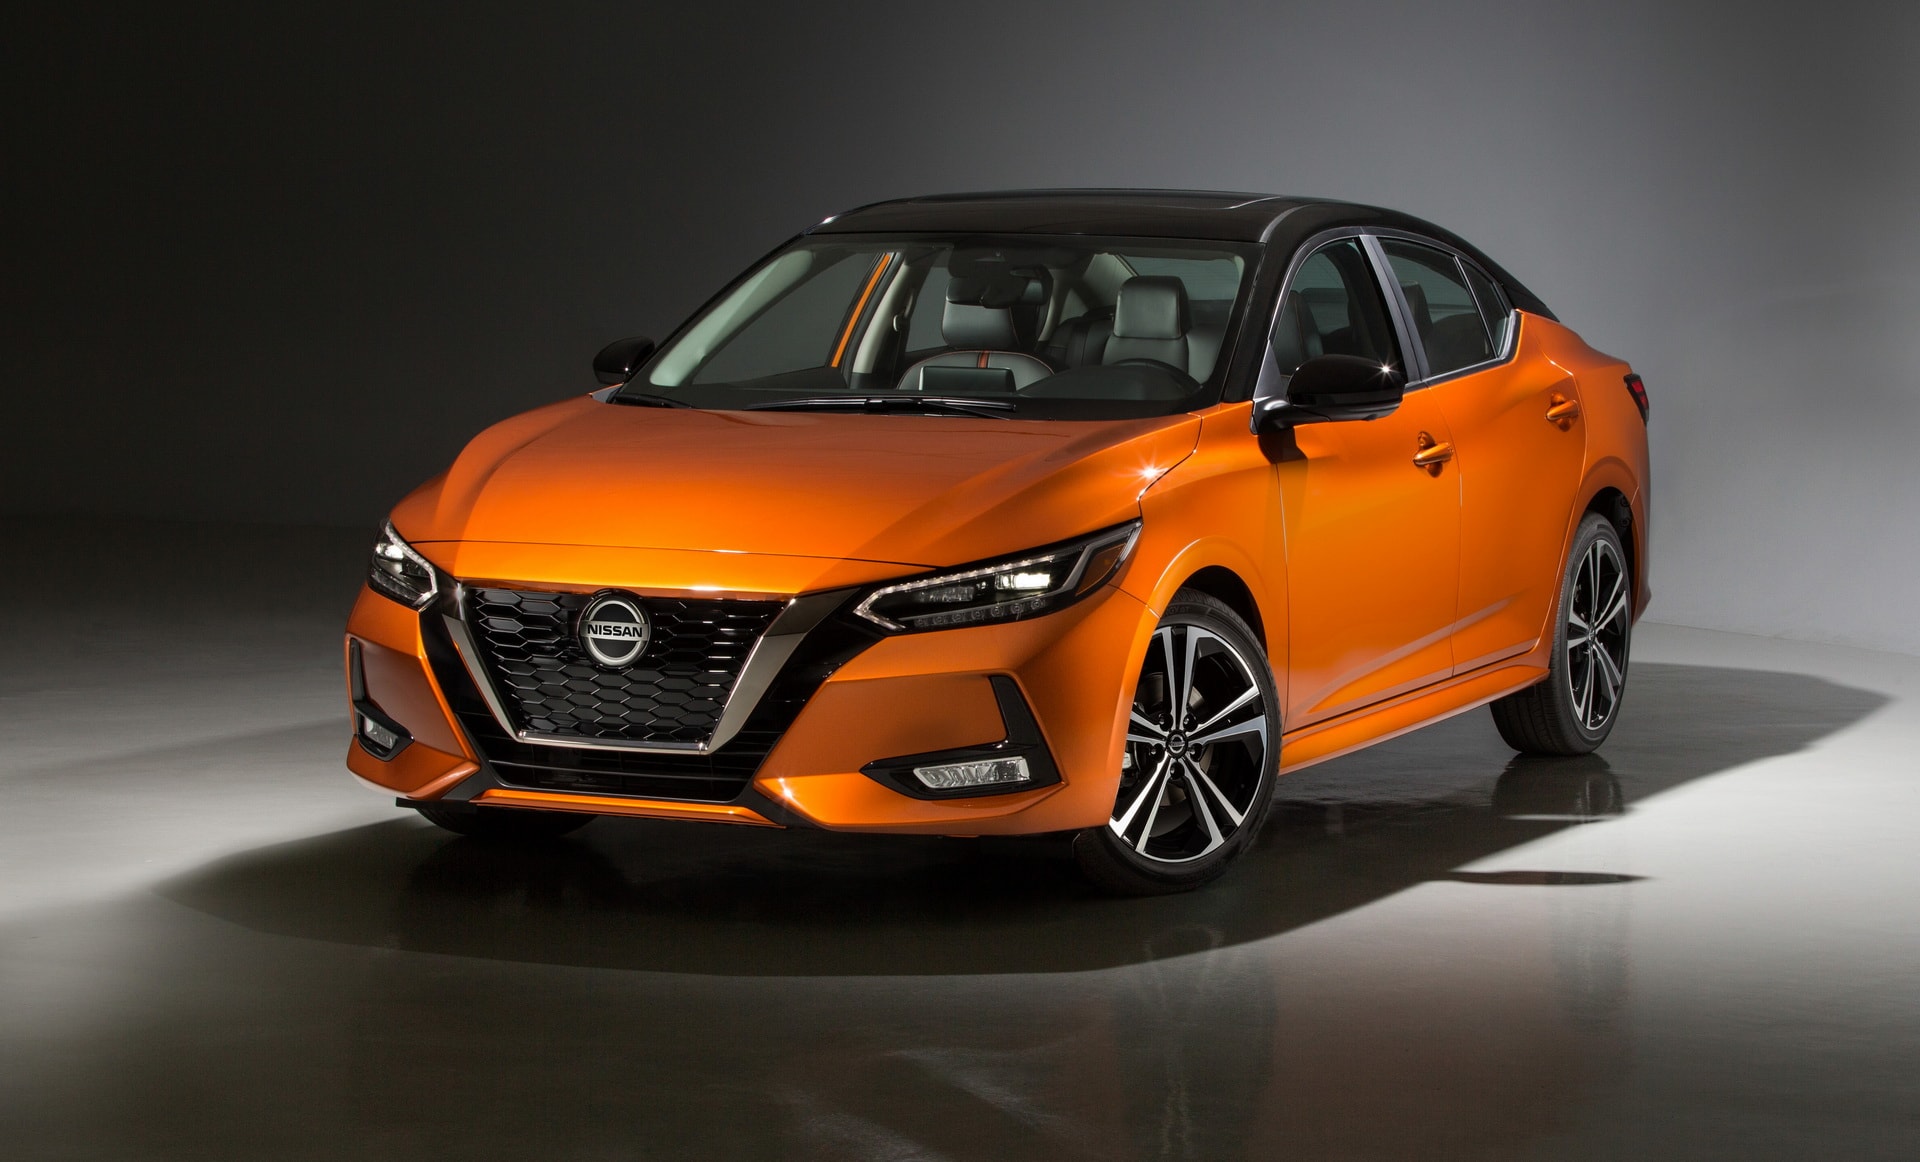 2020 Nissan Sentra Pricing Announced, Starts from $19,090 - autoevolution